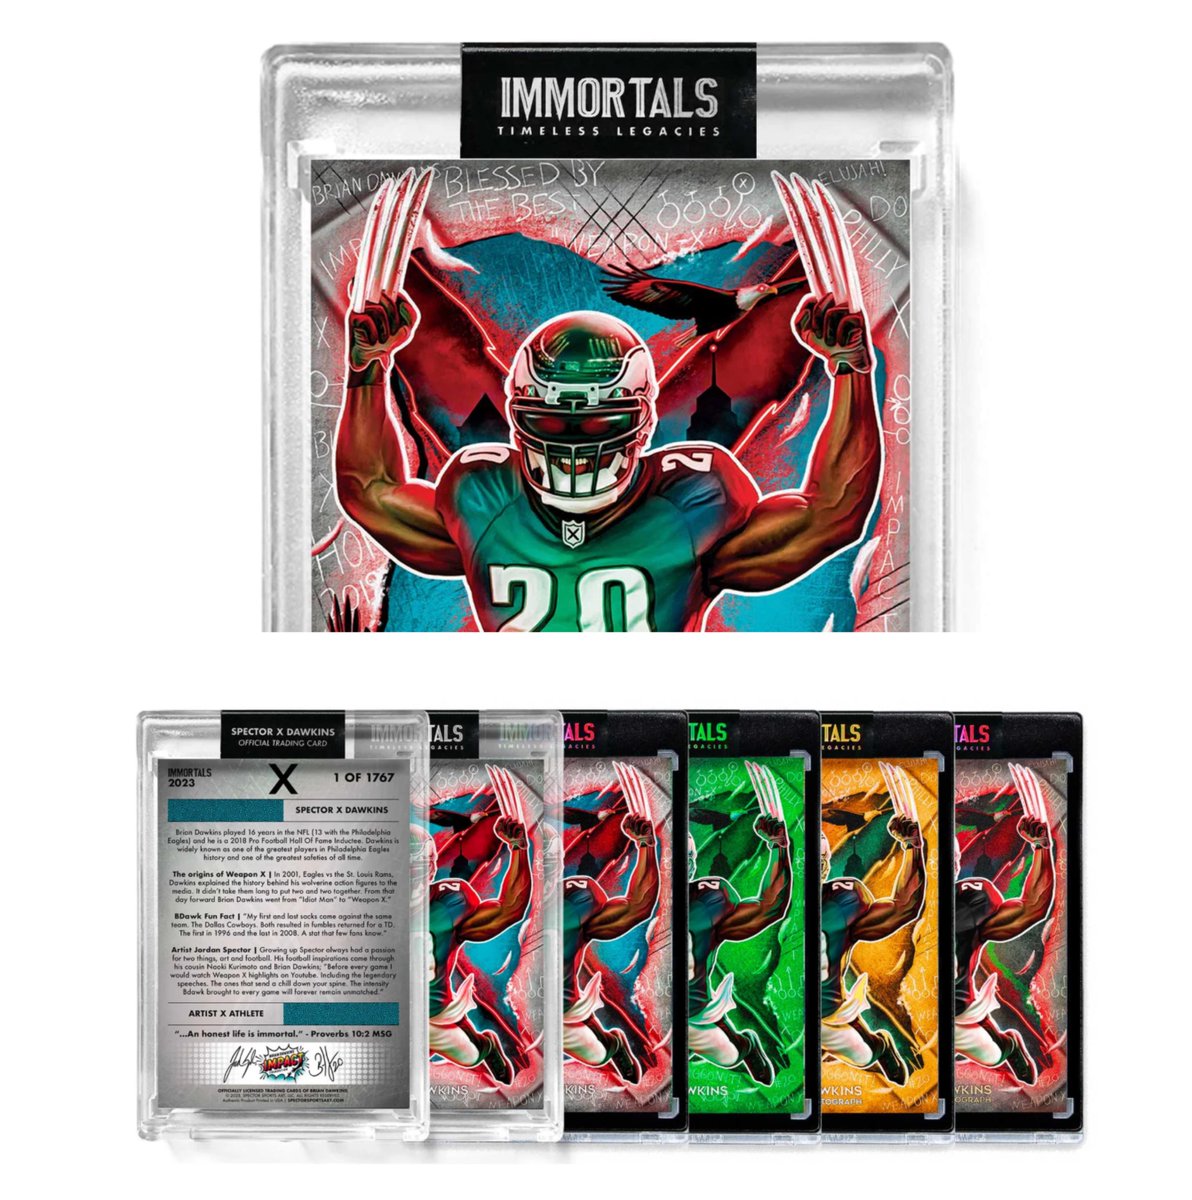 Sports cards news! @Spector_Art is teaming up with @BrianDawkins to release the first ever Immortals Trading Card. Releasing on November 9th. A portion of all proceeds will benefit The Brian Dawkins Impact Foundation. (More info here: shorturl.at/lzN19)